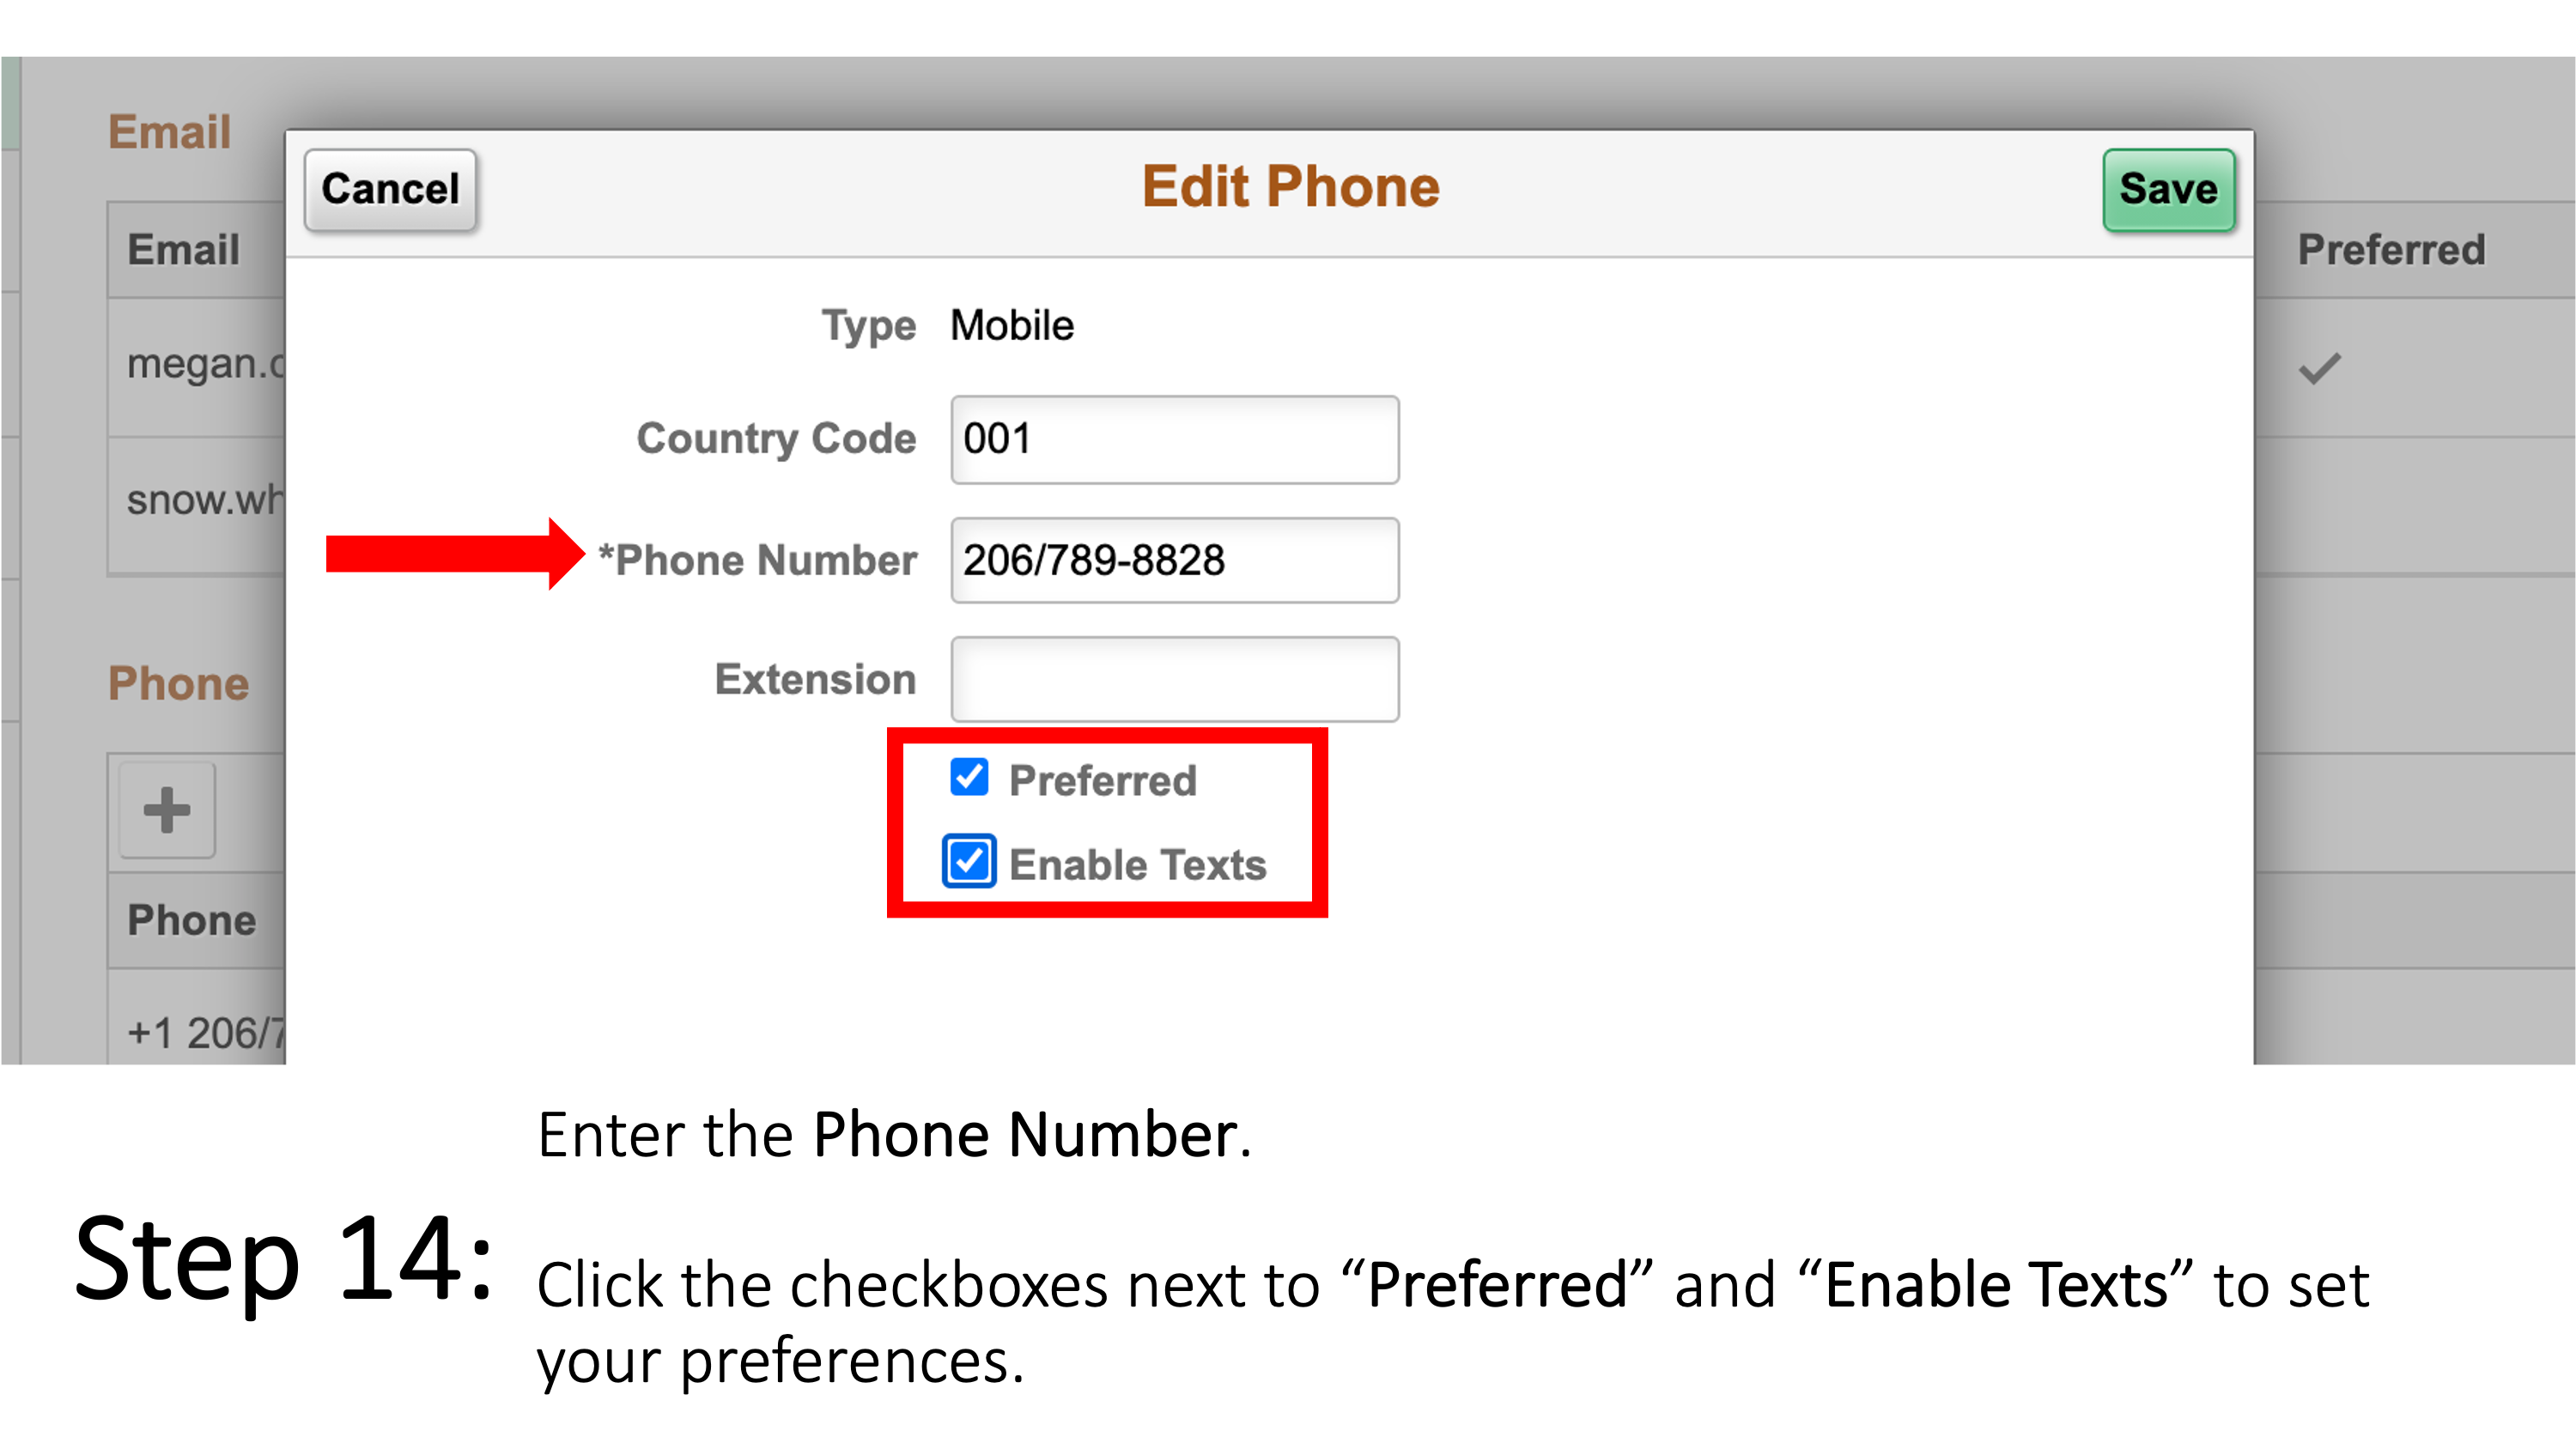 Enter the Phone Number. Click the checkboxes next to “Preferred” and “Enable Texts” to set your preferences.